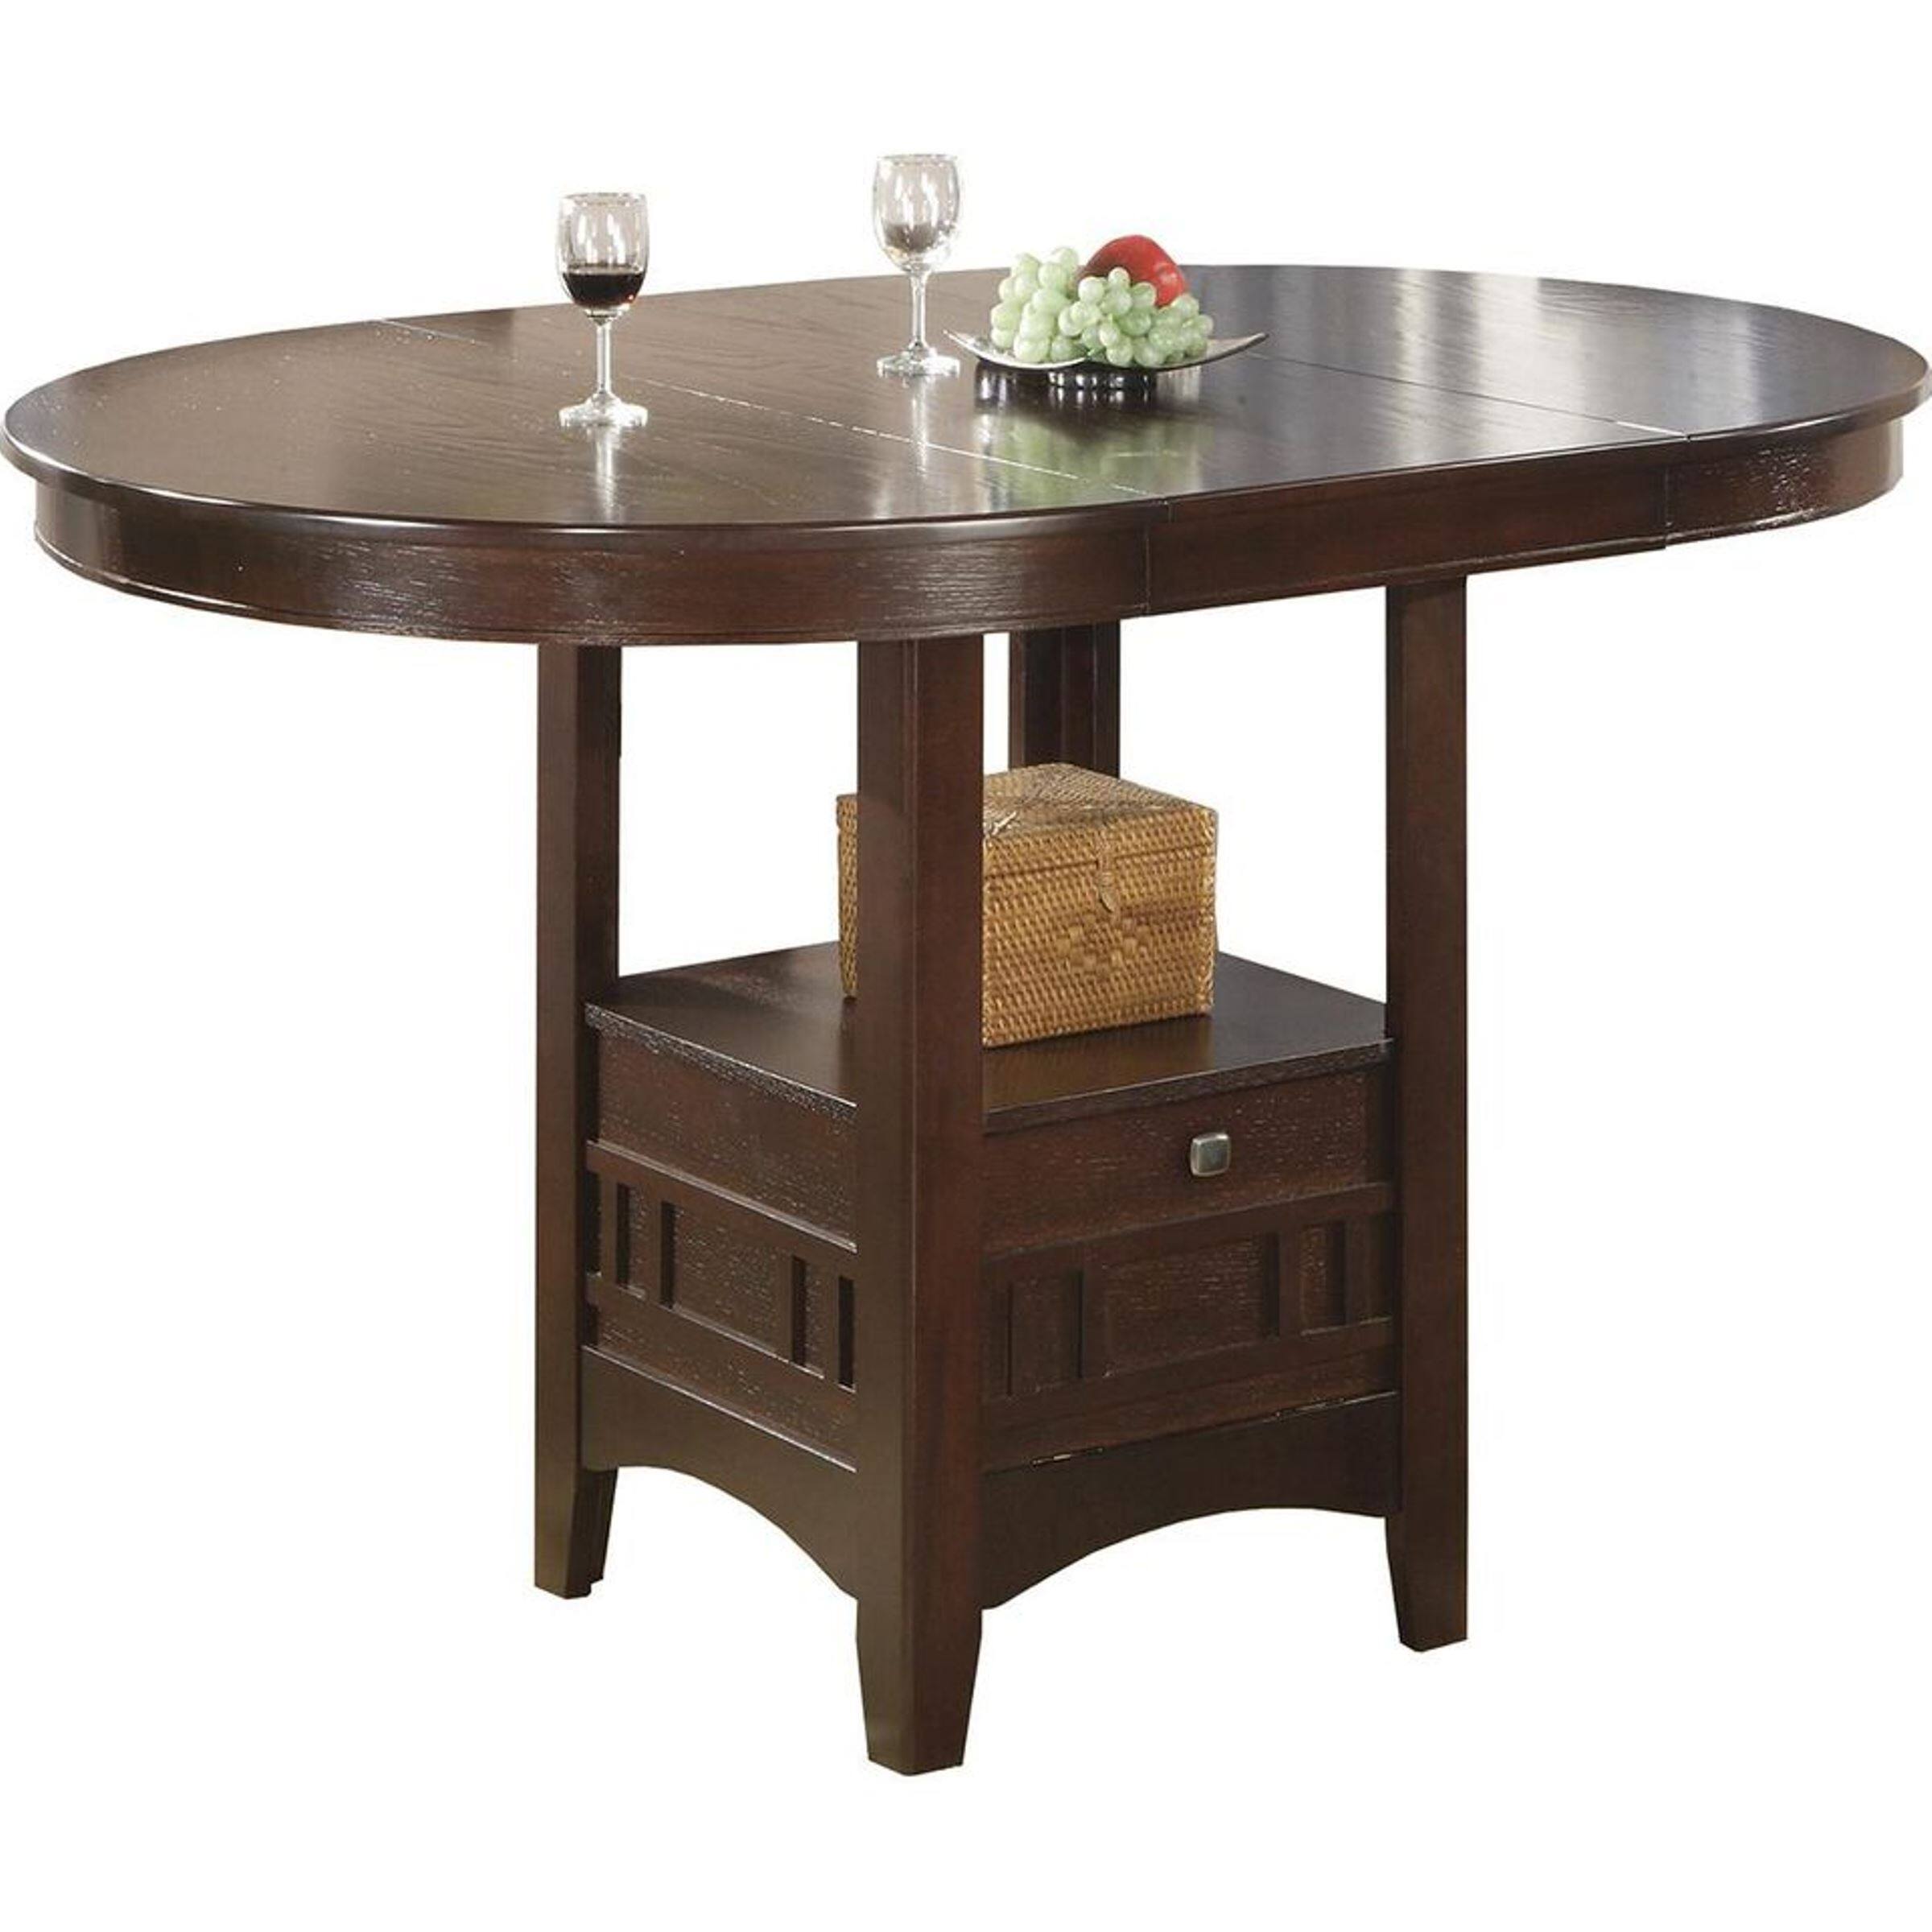 Espresso Extendable Counter-Hight Dining Table with Storage Base